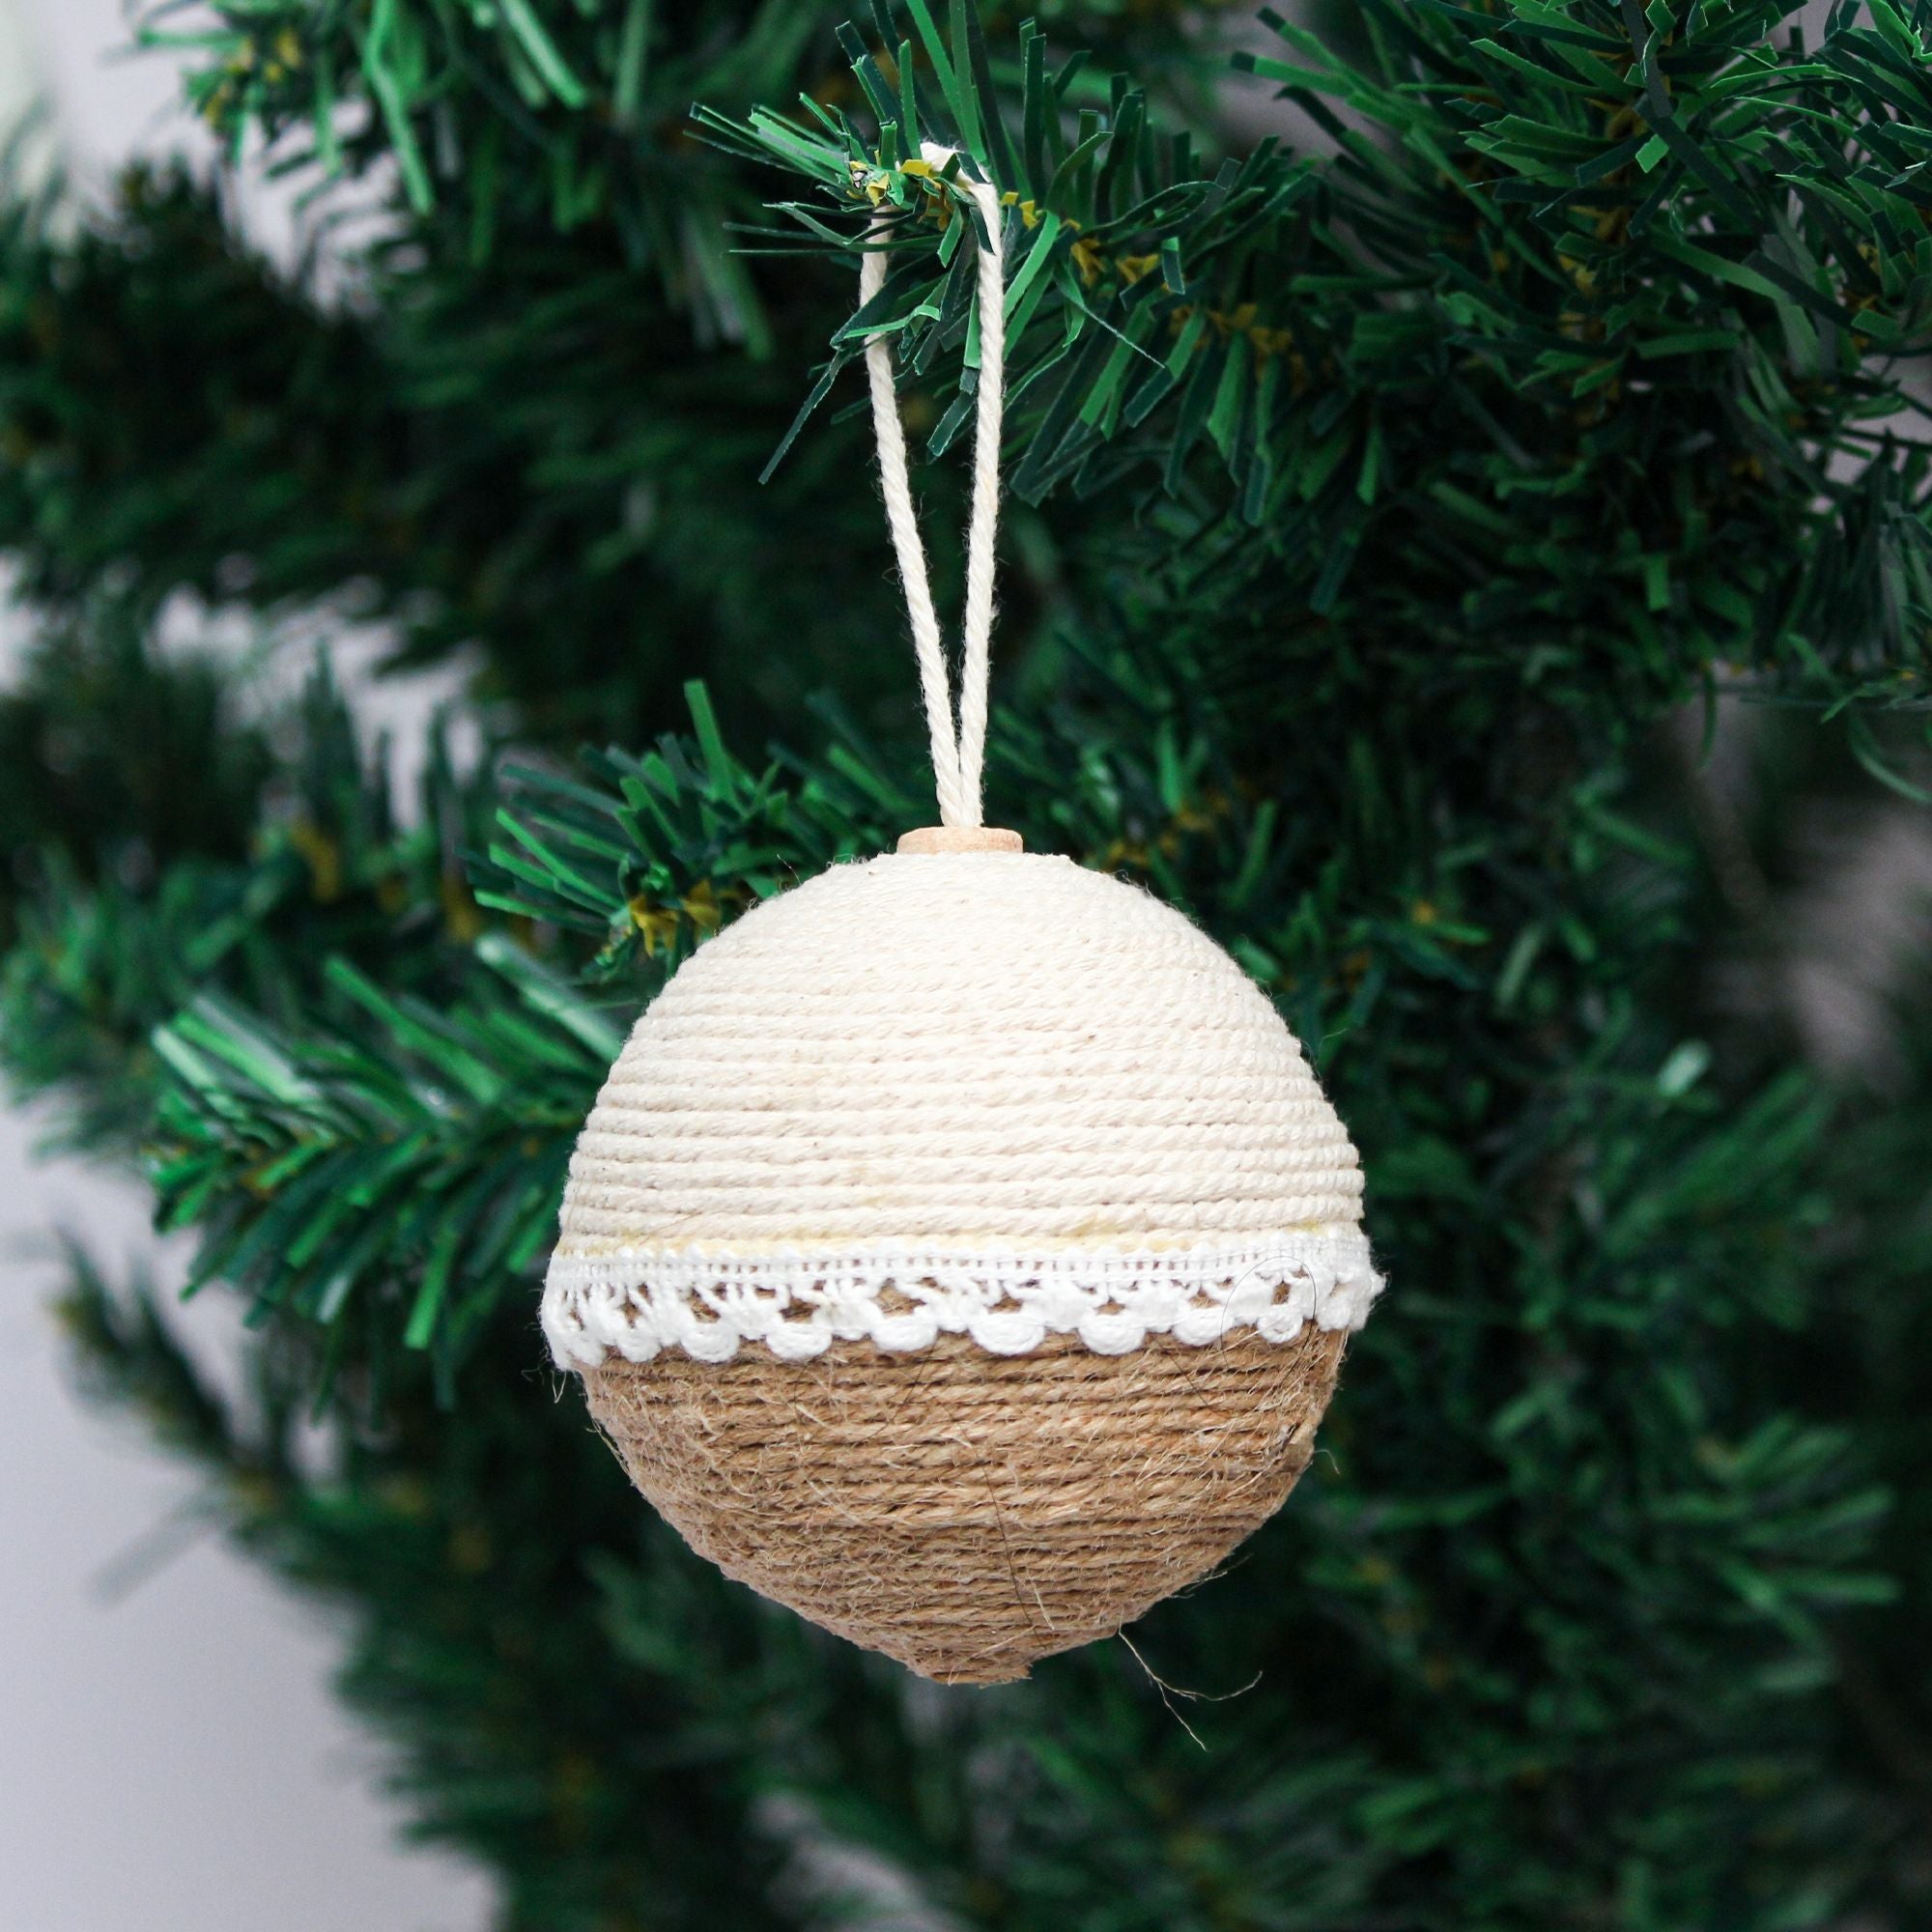 Handmade Christmas Ornaments - Jute and Cotton Thread Baubles, 50mm, 4pc